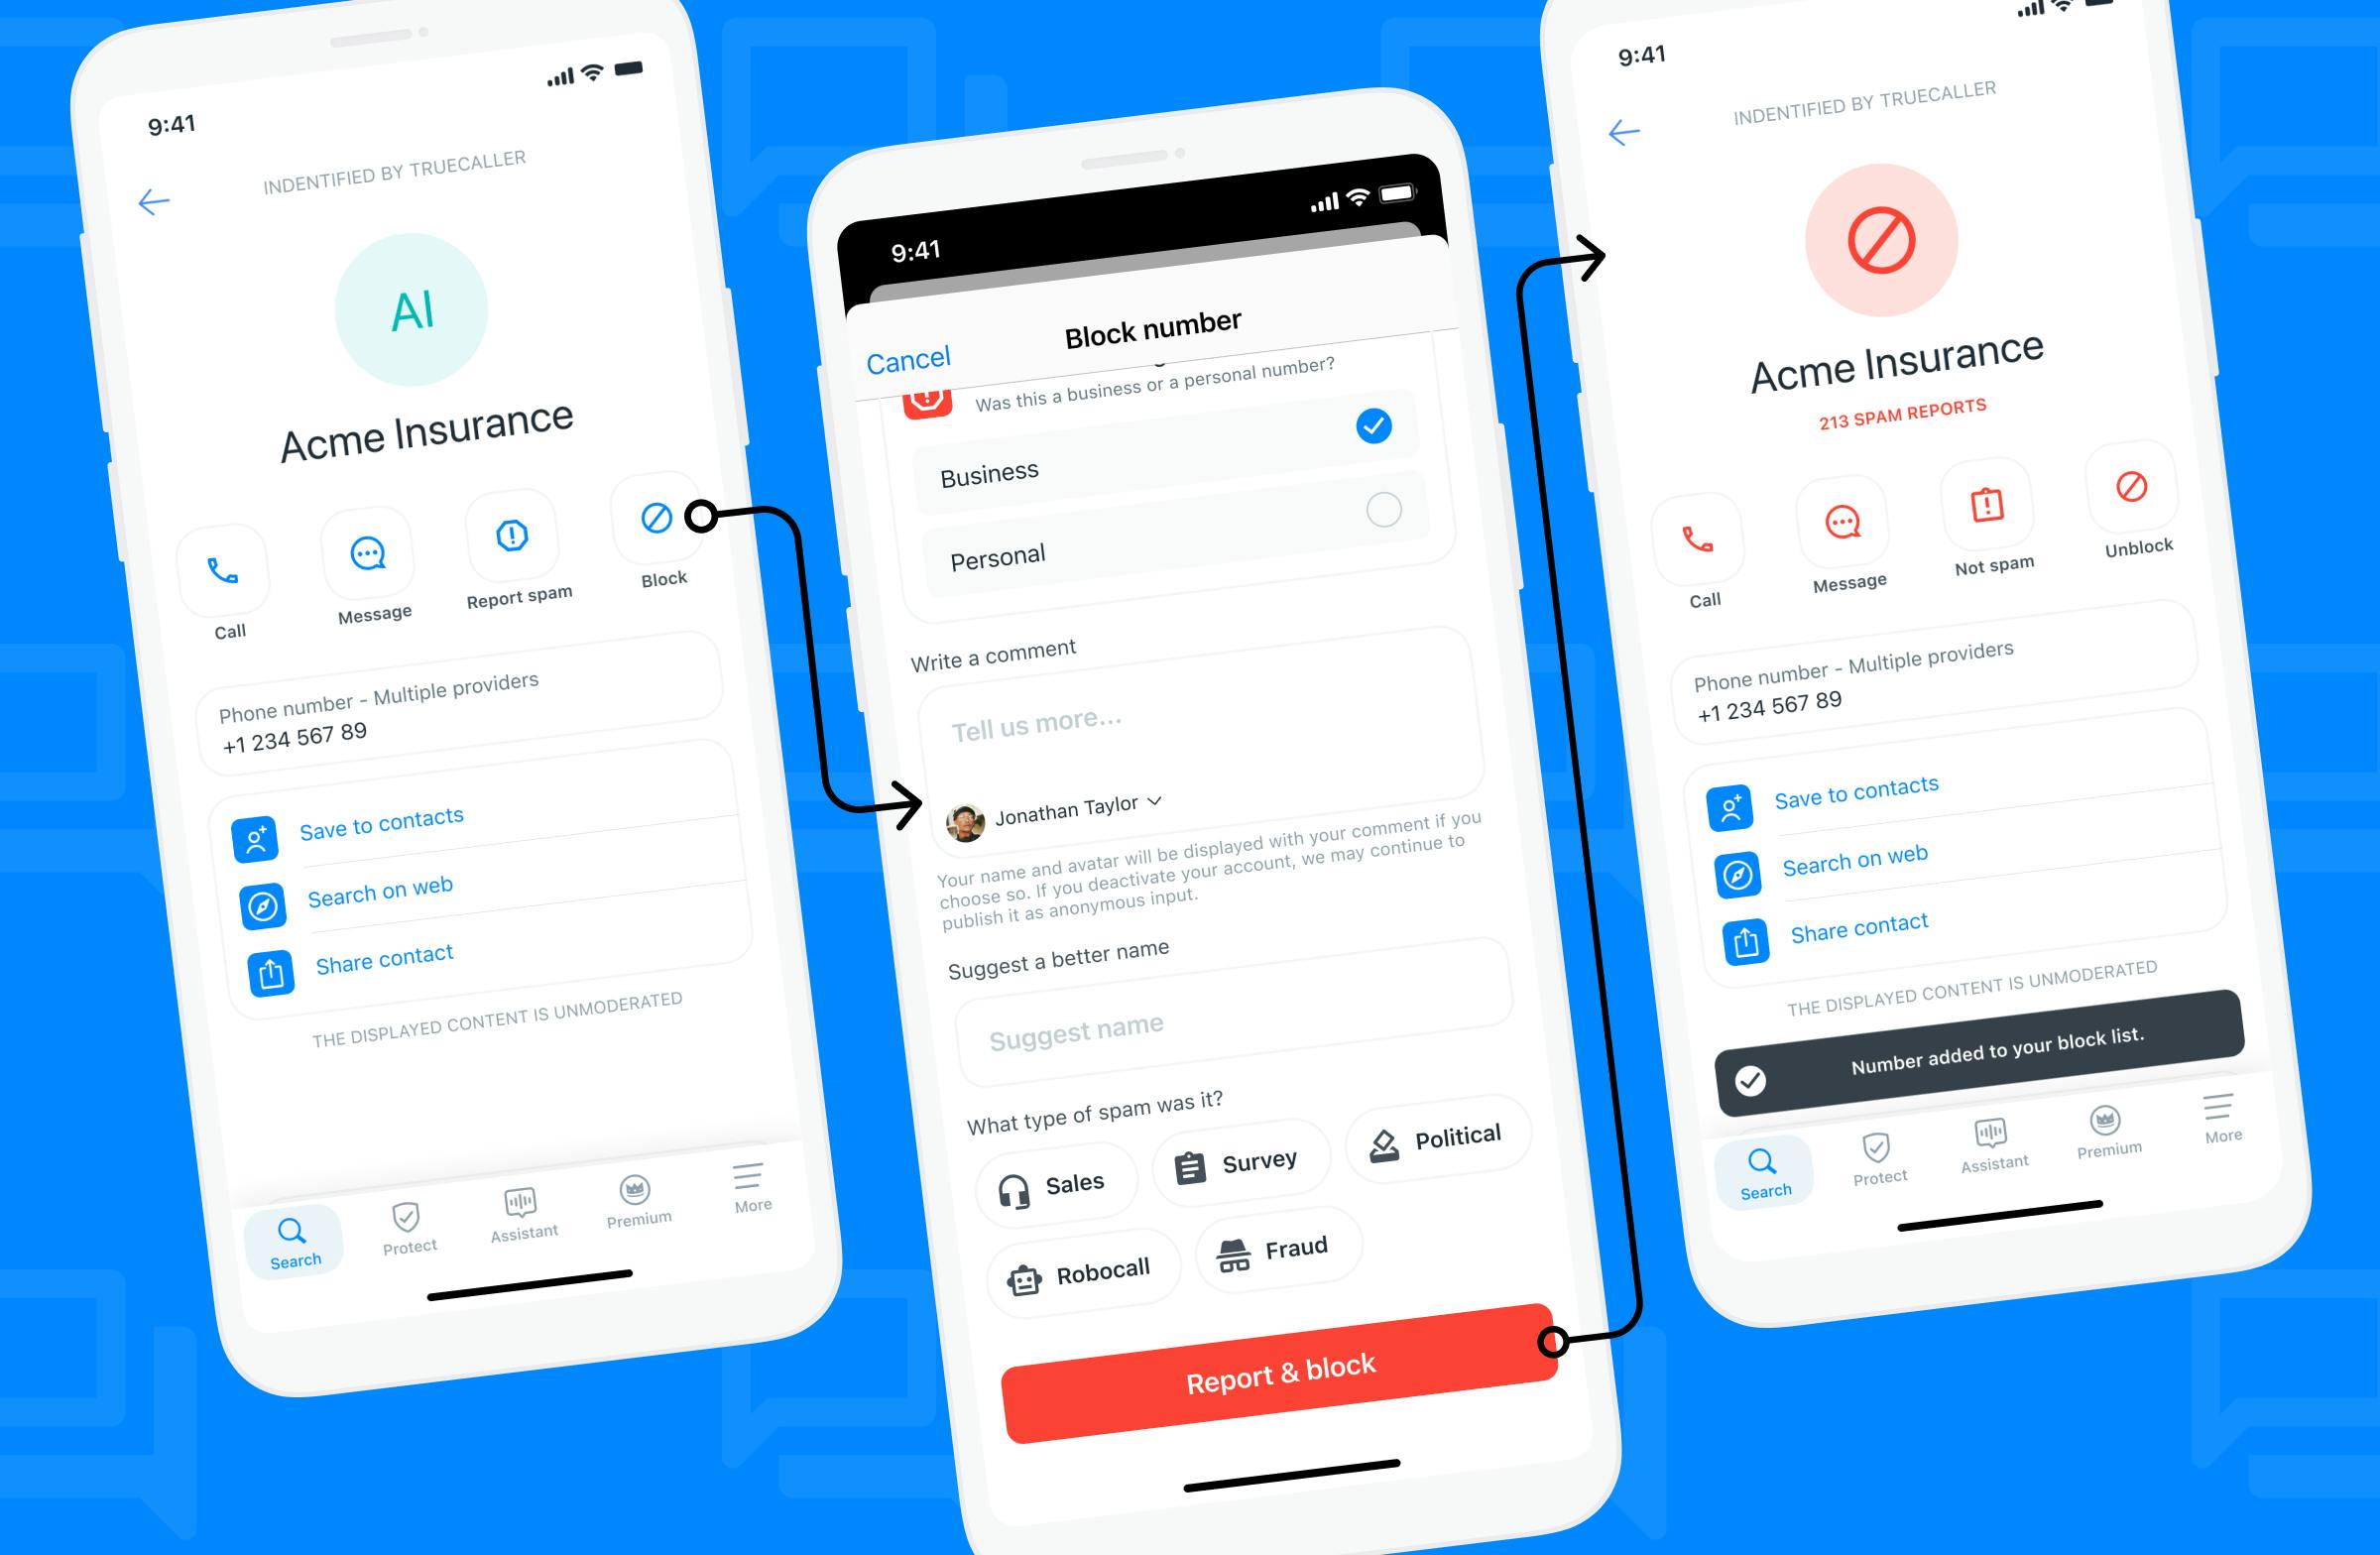 Truecaller Launches Chat Feature to Combat Fake News - Truecaller Blog